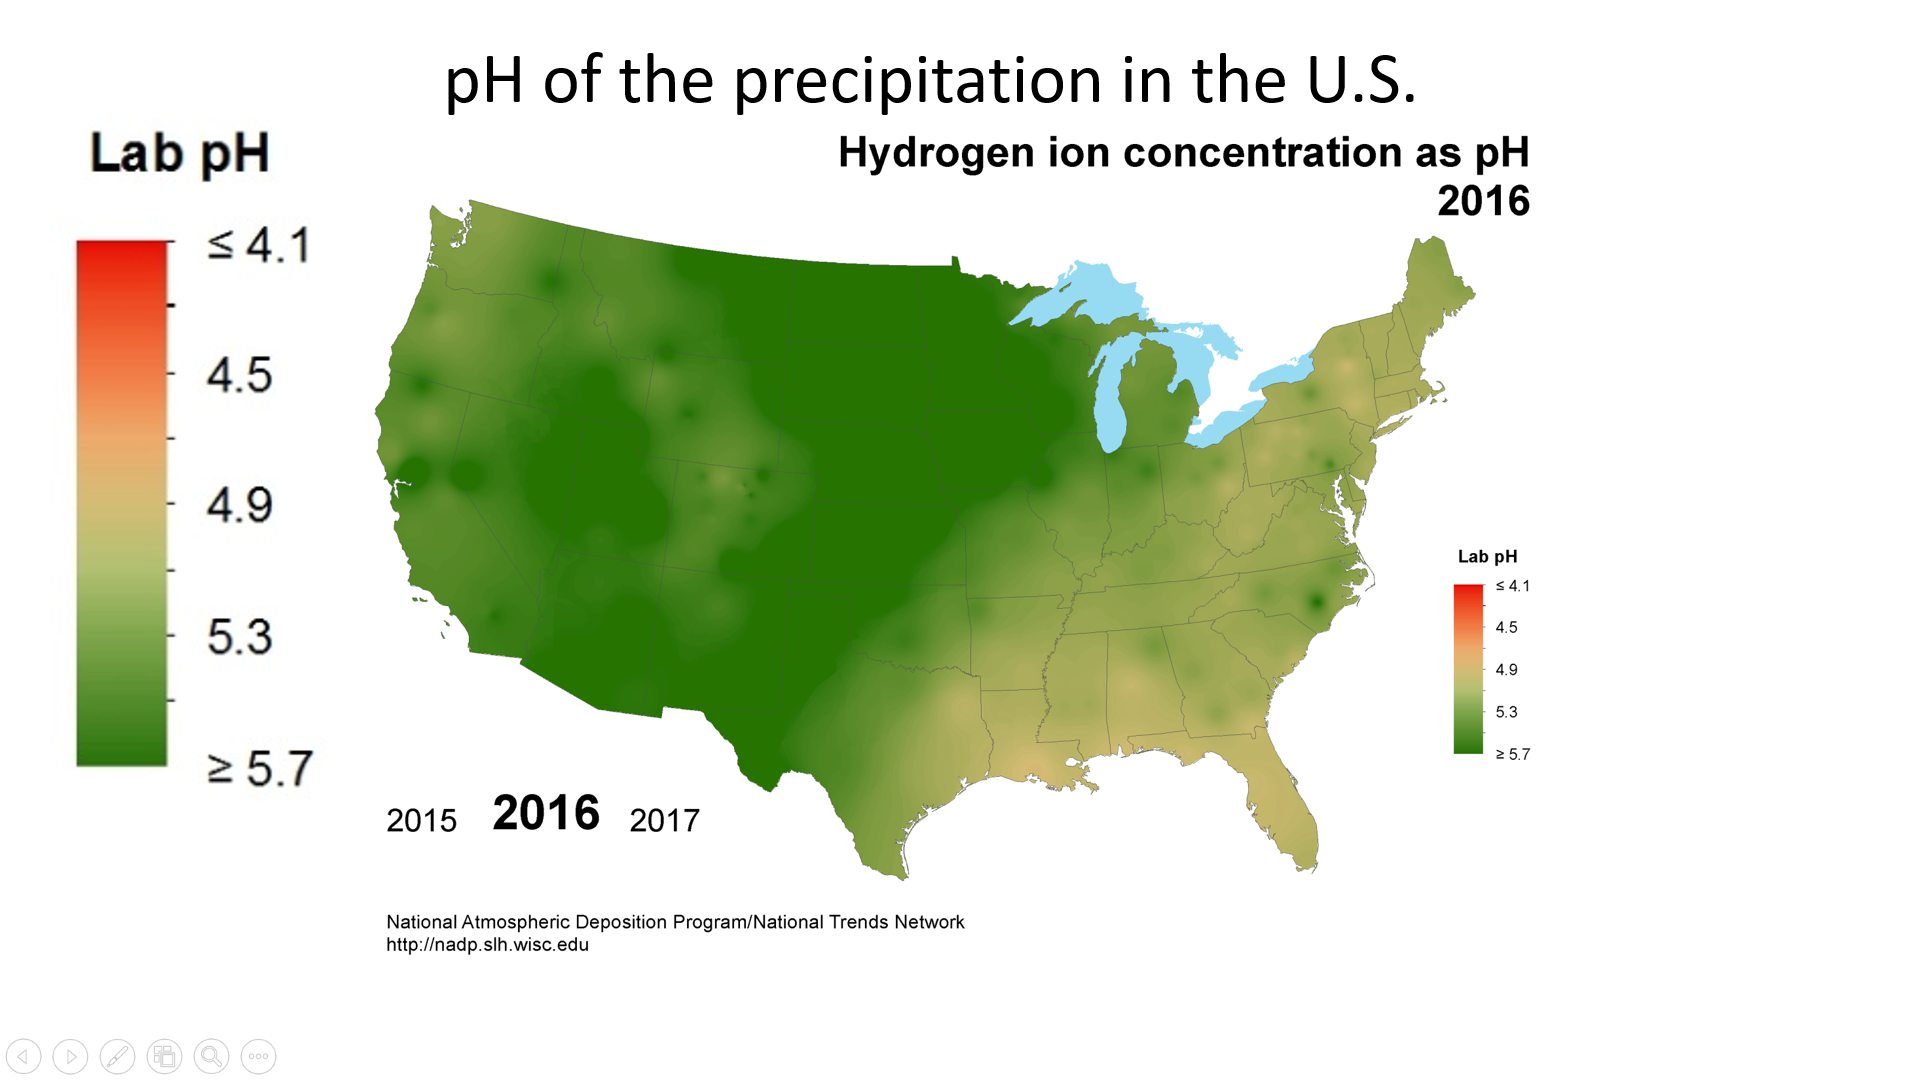 A map of the pH of precipitation in the U.S. in 2016